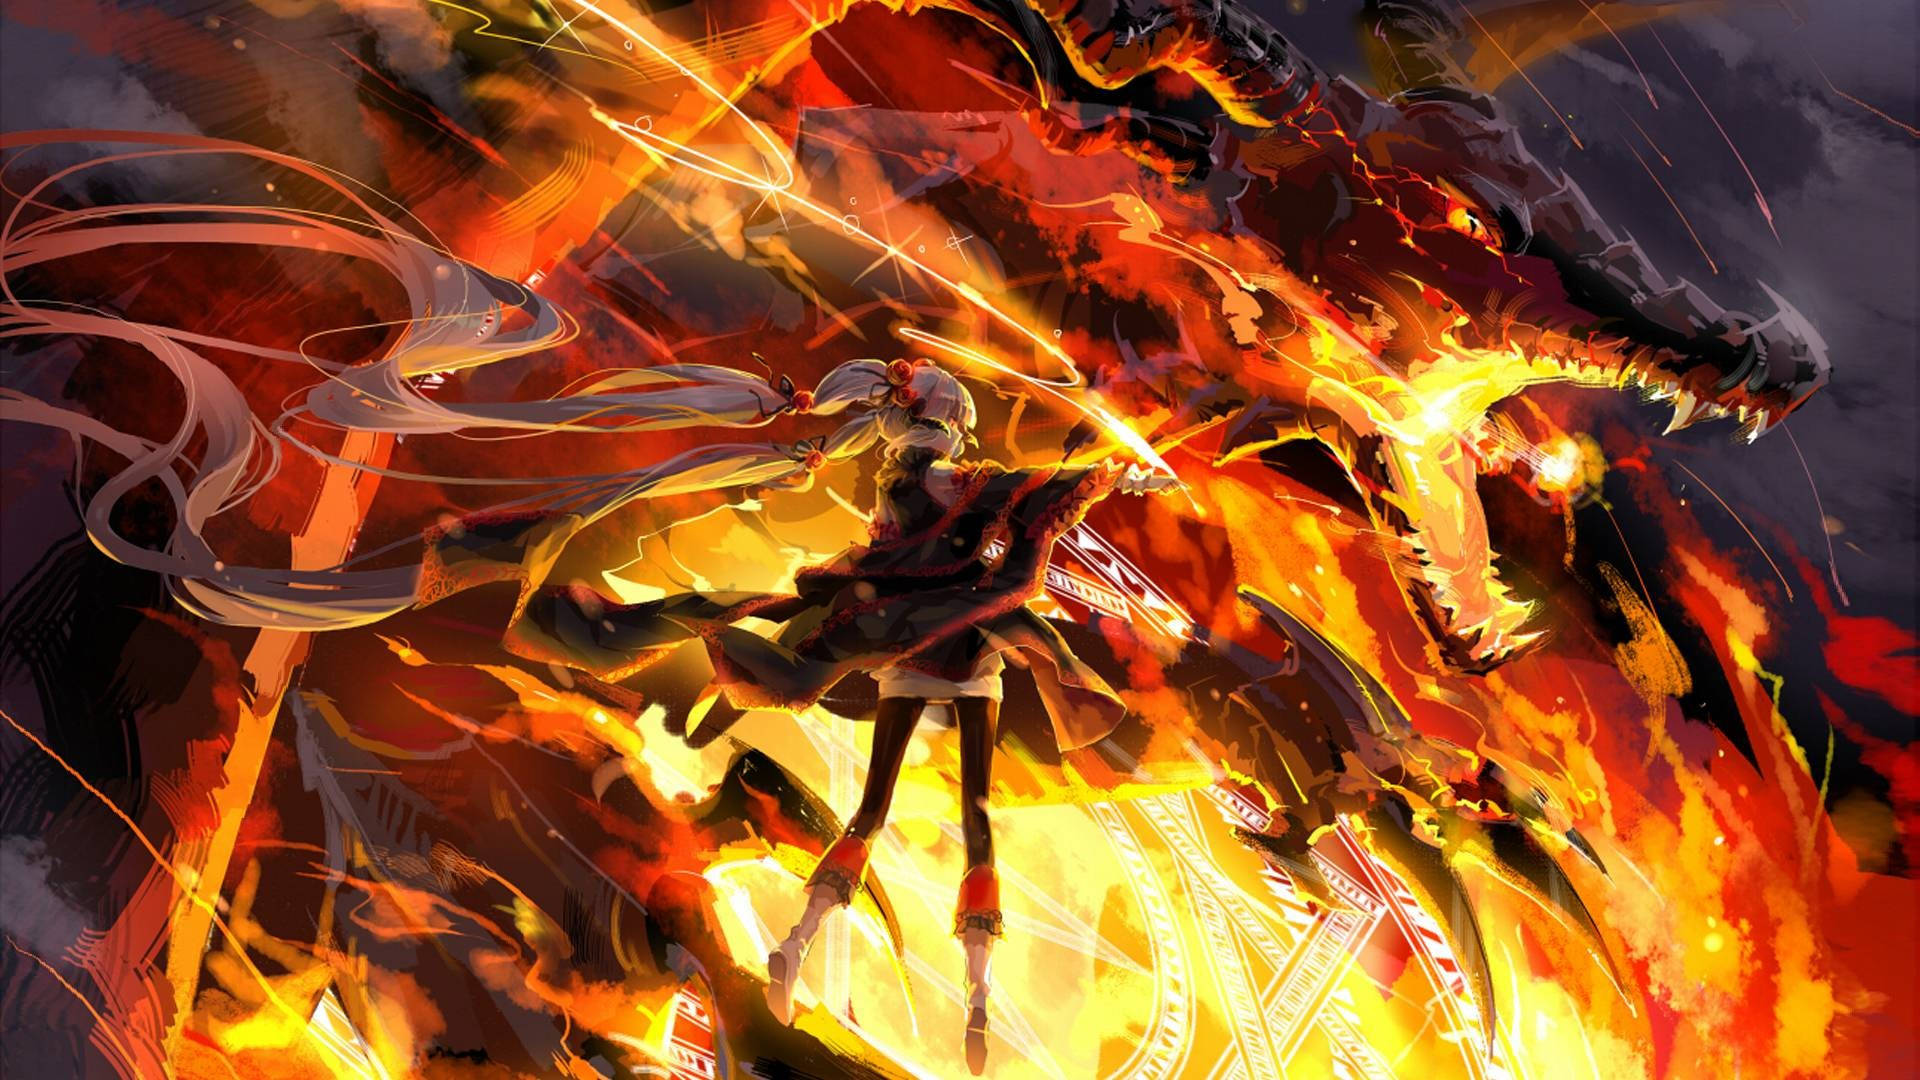 Unleashed Fury Of The Coolest Dragon Wallpaper